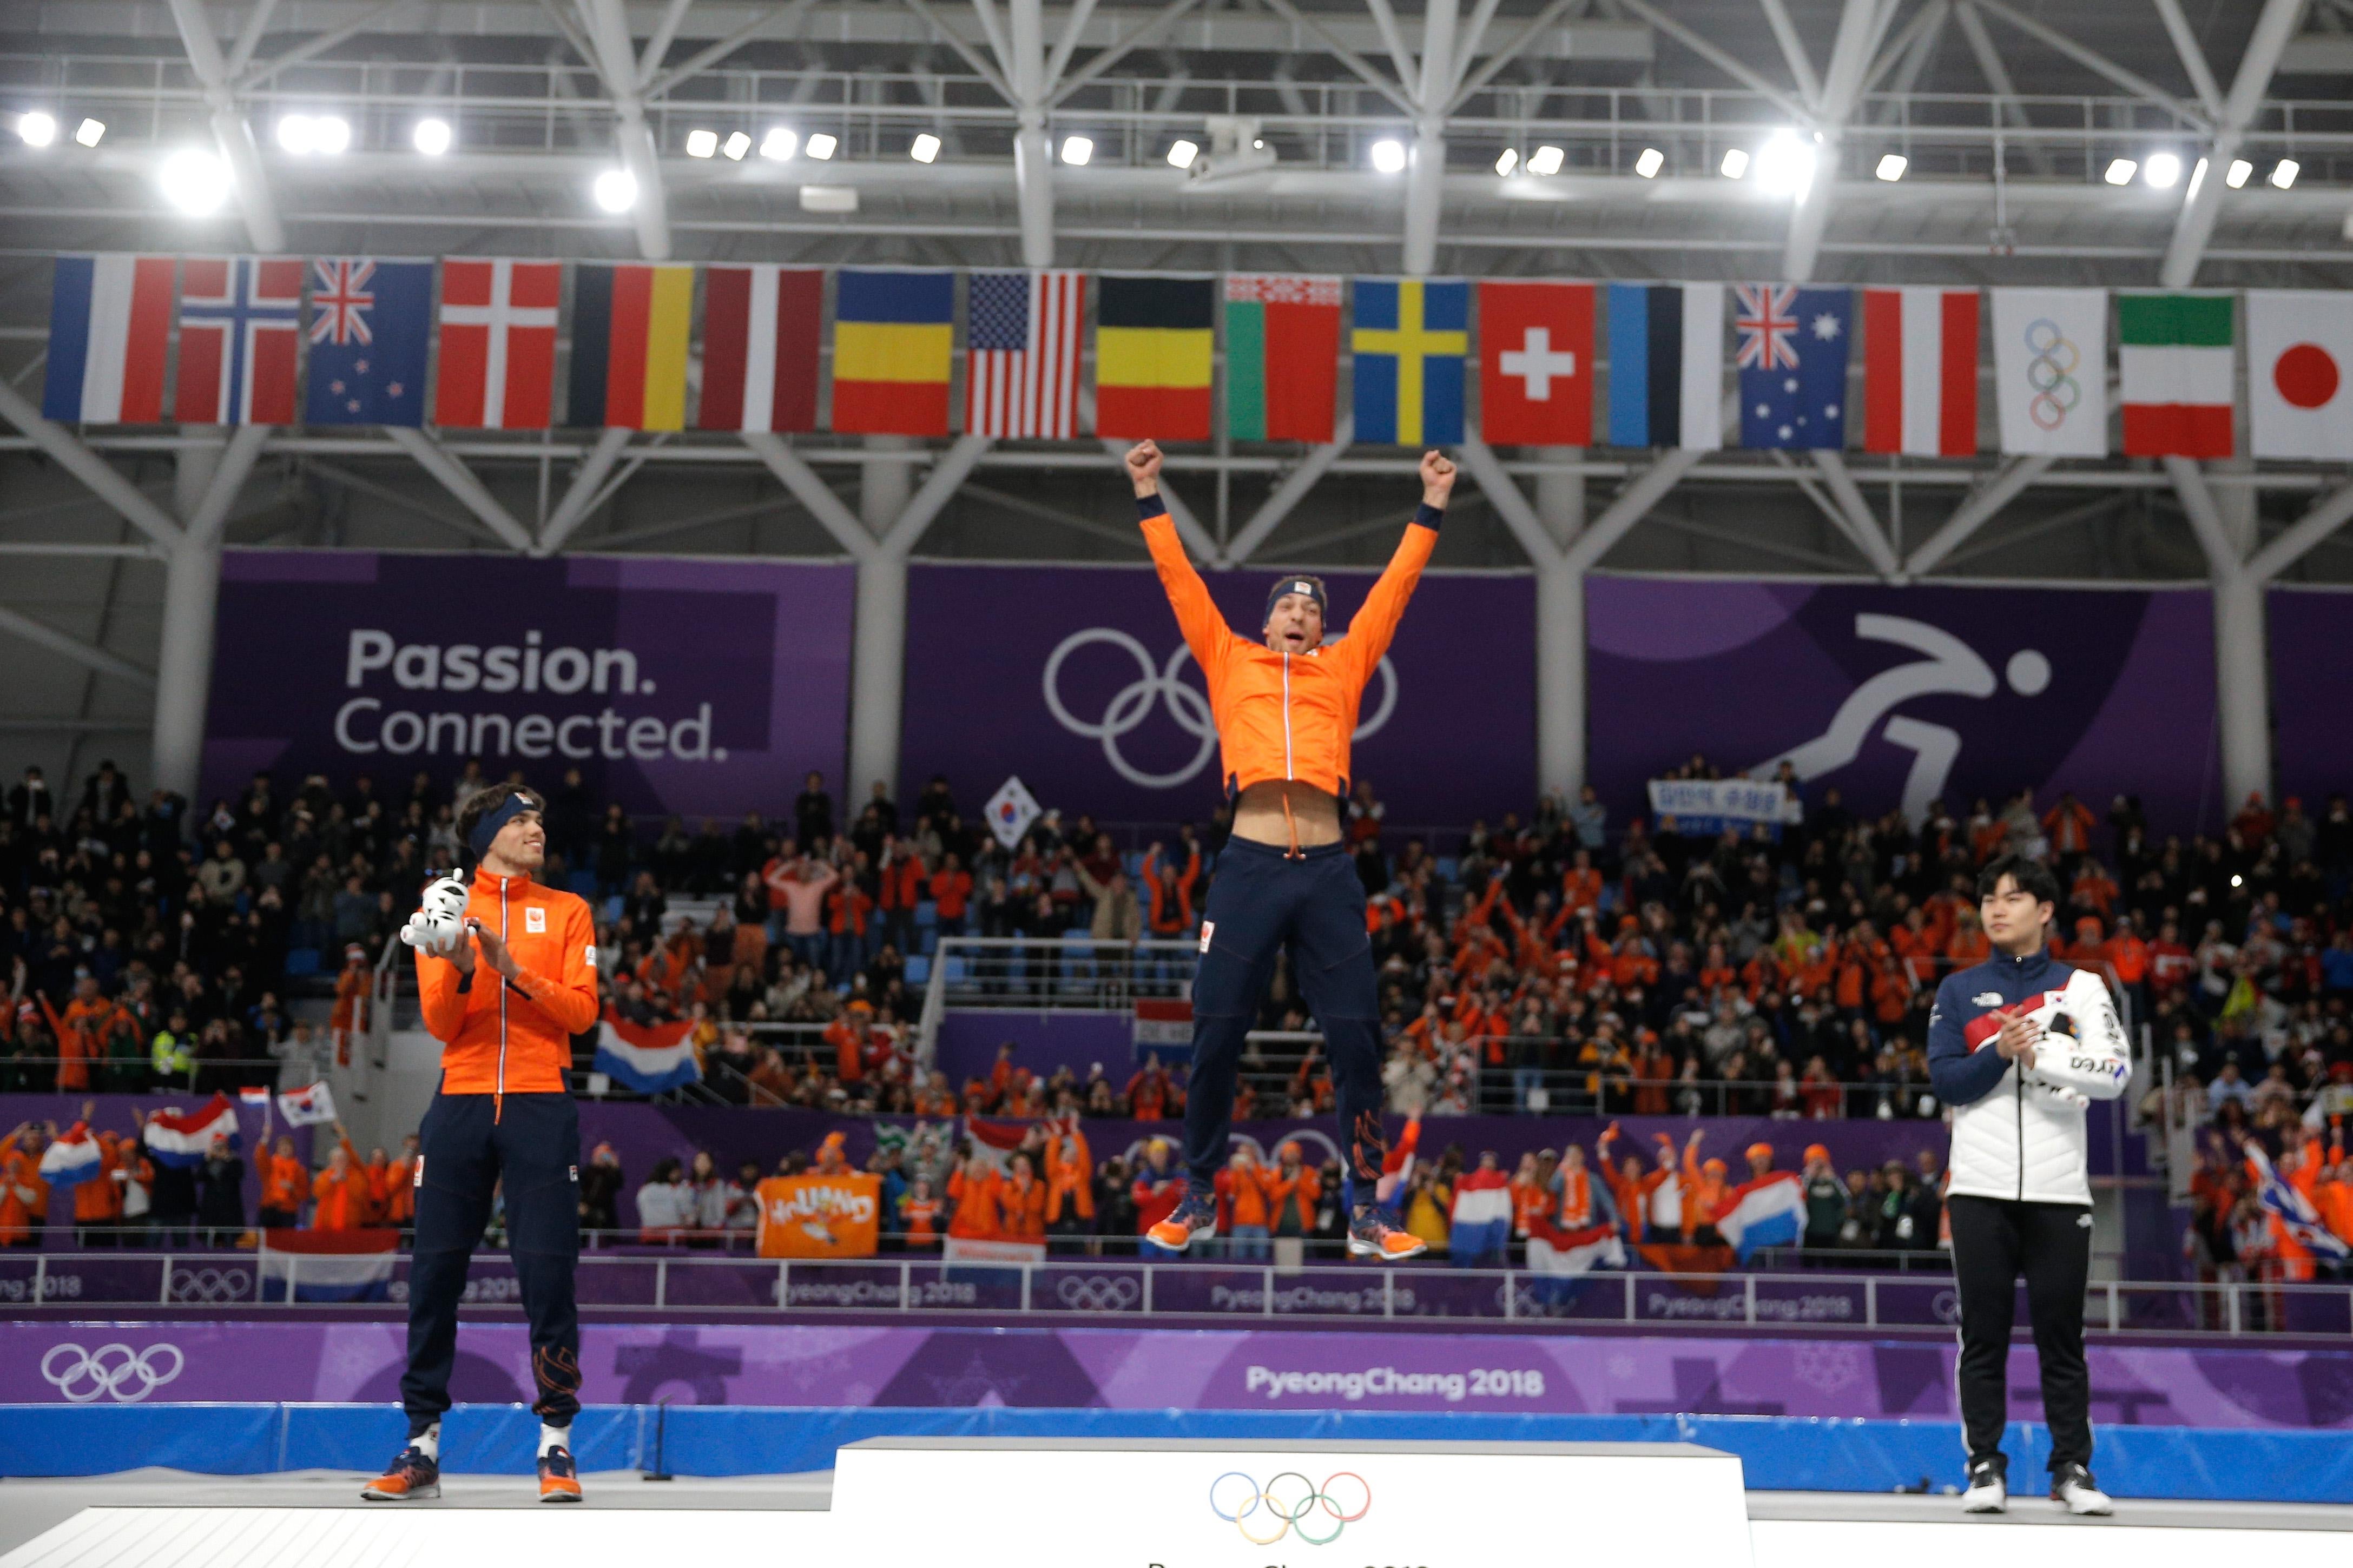 GANGNEUNG, SOUTH KOREA - FEBRUARY 13:  Gold medalist Kjeld Nuis of the Netherlands (C) celebrates with silver medalist Patrick Roest of the Netherlands (L) and bronze medalist Min Seok Kim of Korea (R) during the victory ceremony after the Men's 1500m Speed Skating on day four of the PyeongChang 2018 Winter Olympic Games at Gangneung Oval  on February 13, 2018 in Gangneung, South Korea.  (Photo by Dean Mouhtaropoulos/Getty Images)